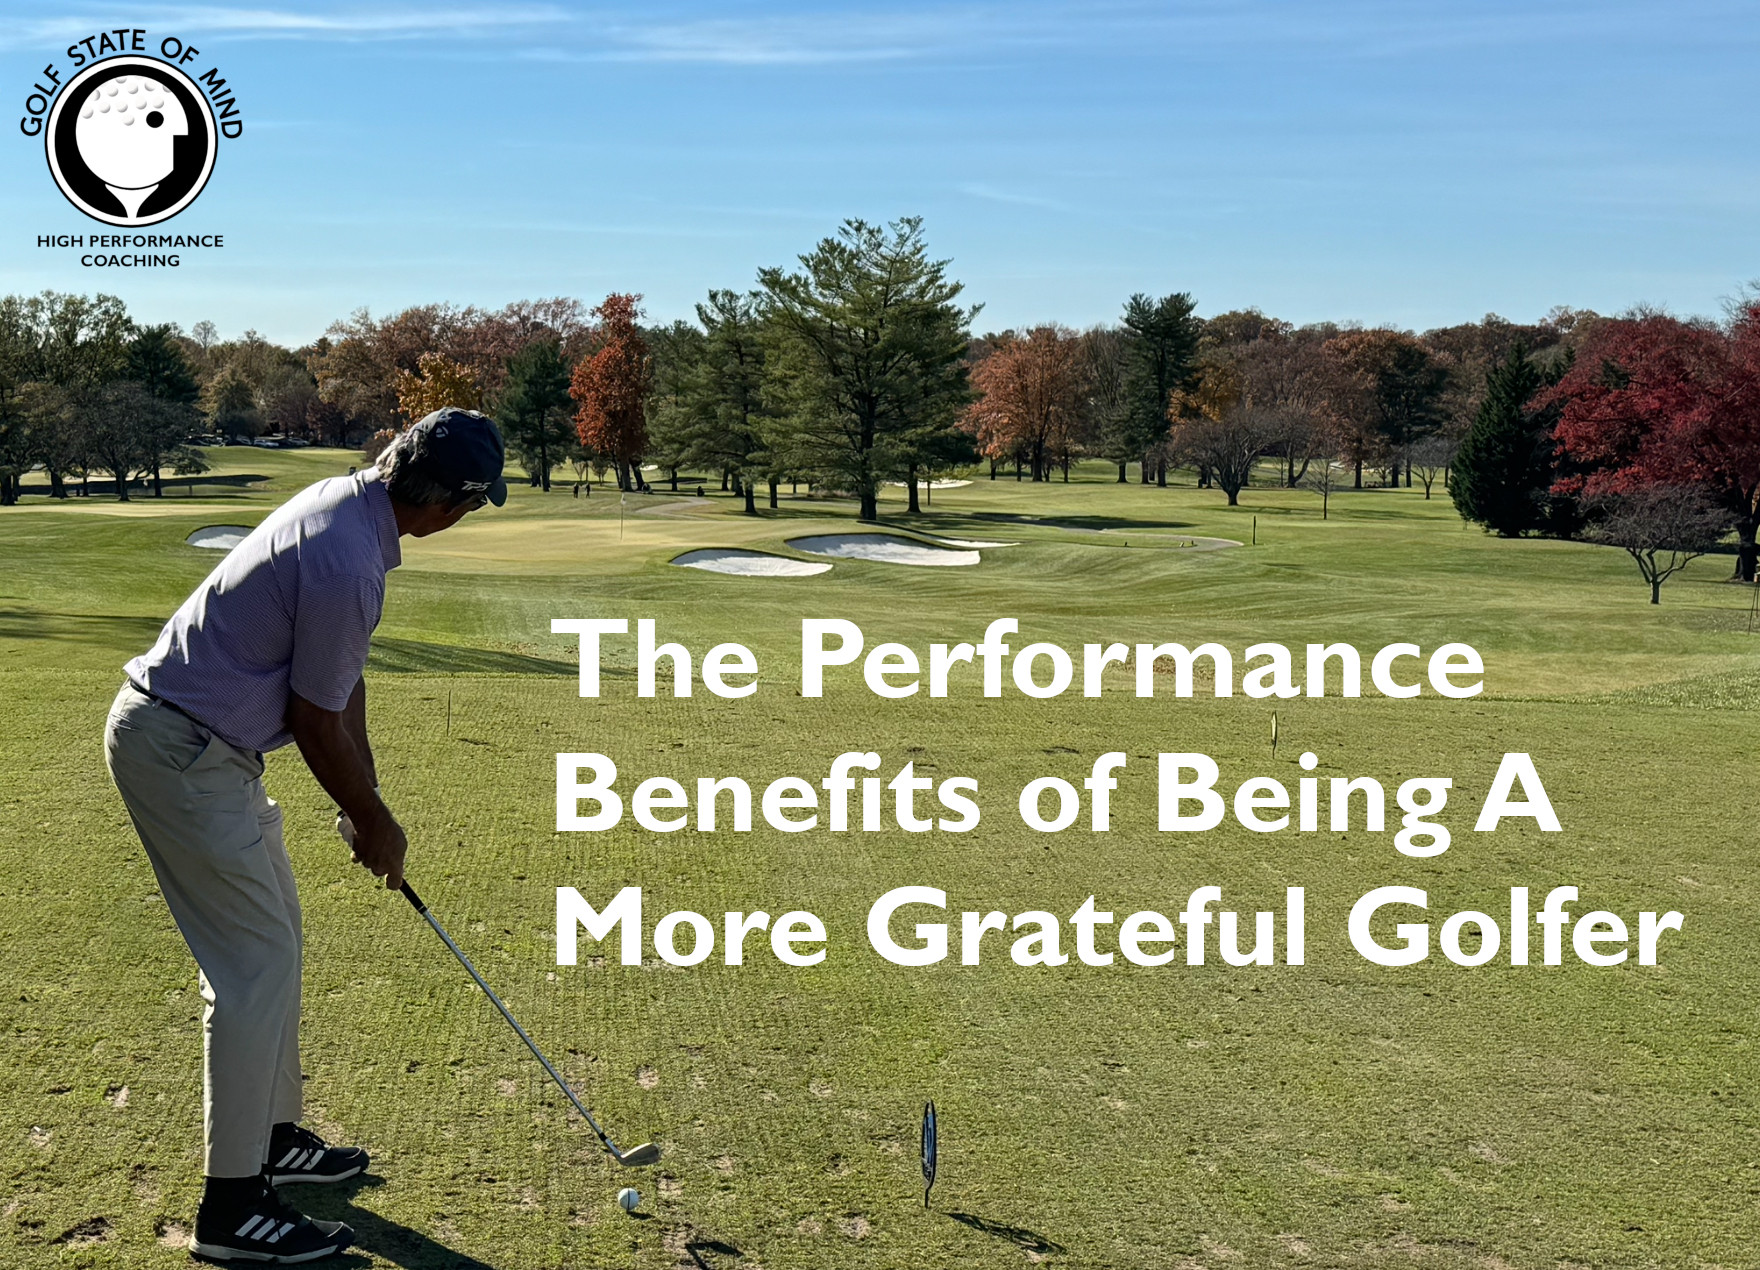 The Performance Benefits Of Being A Grateful Golfer